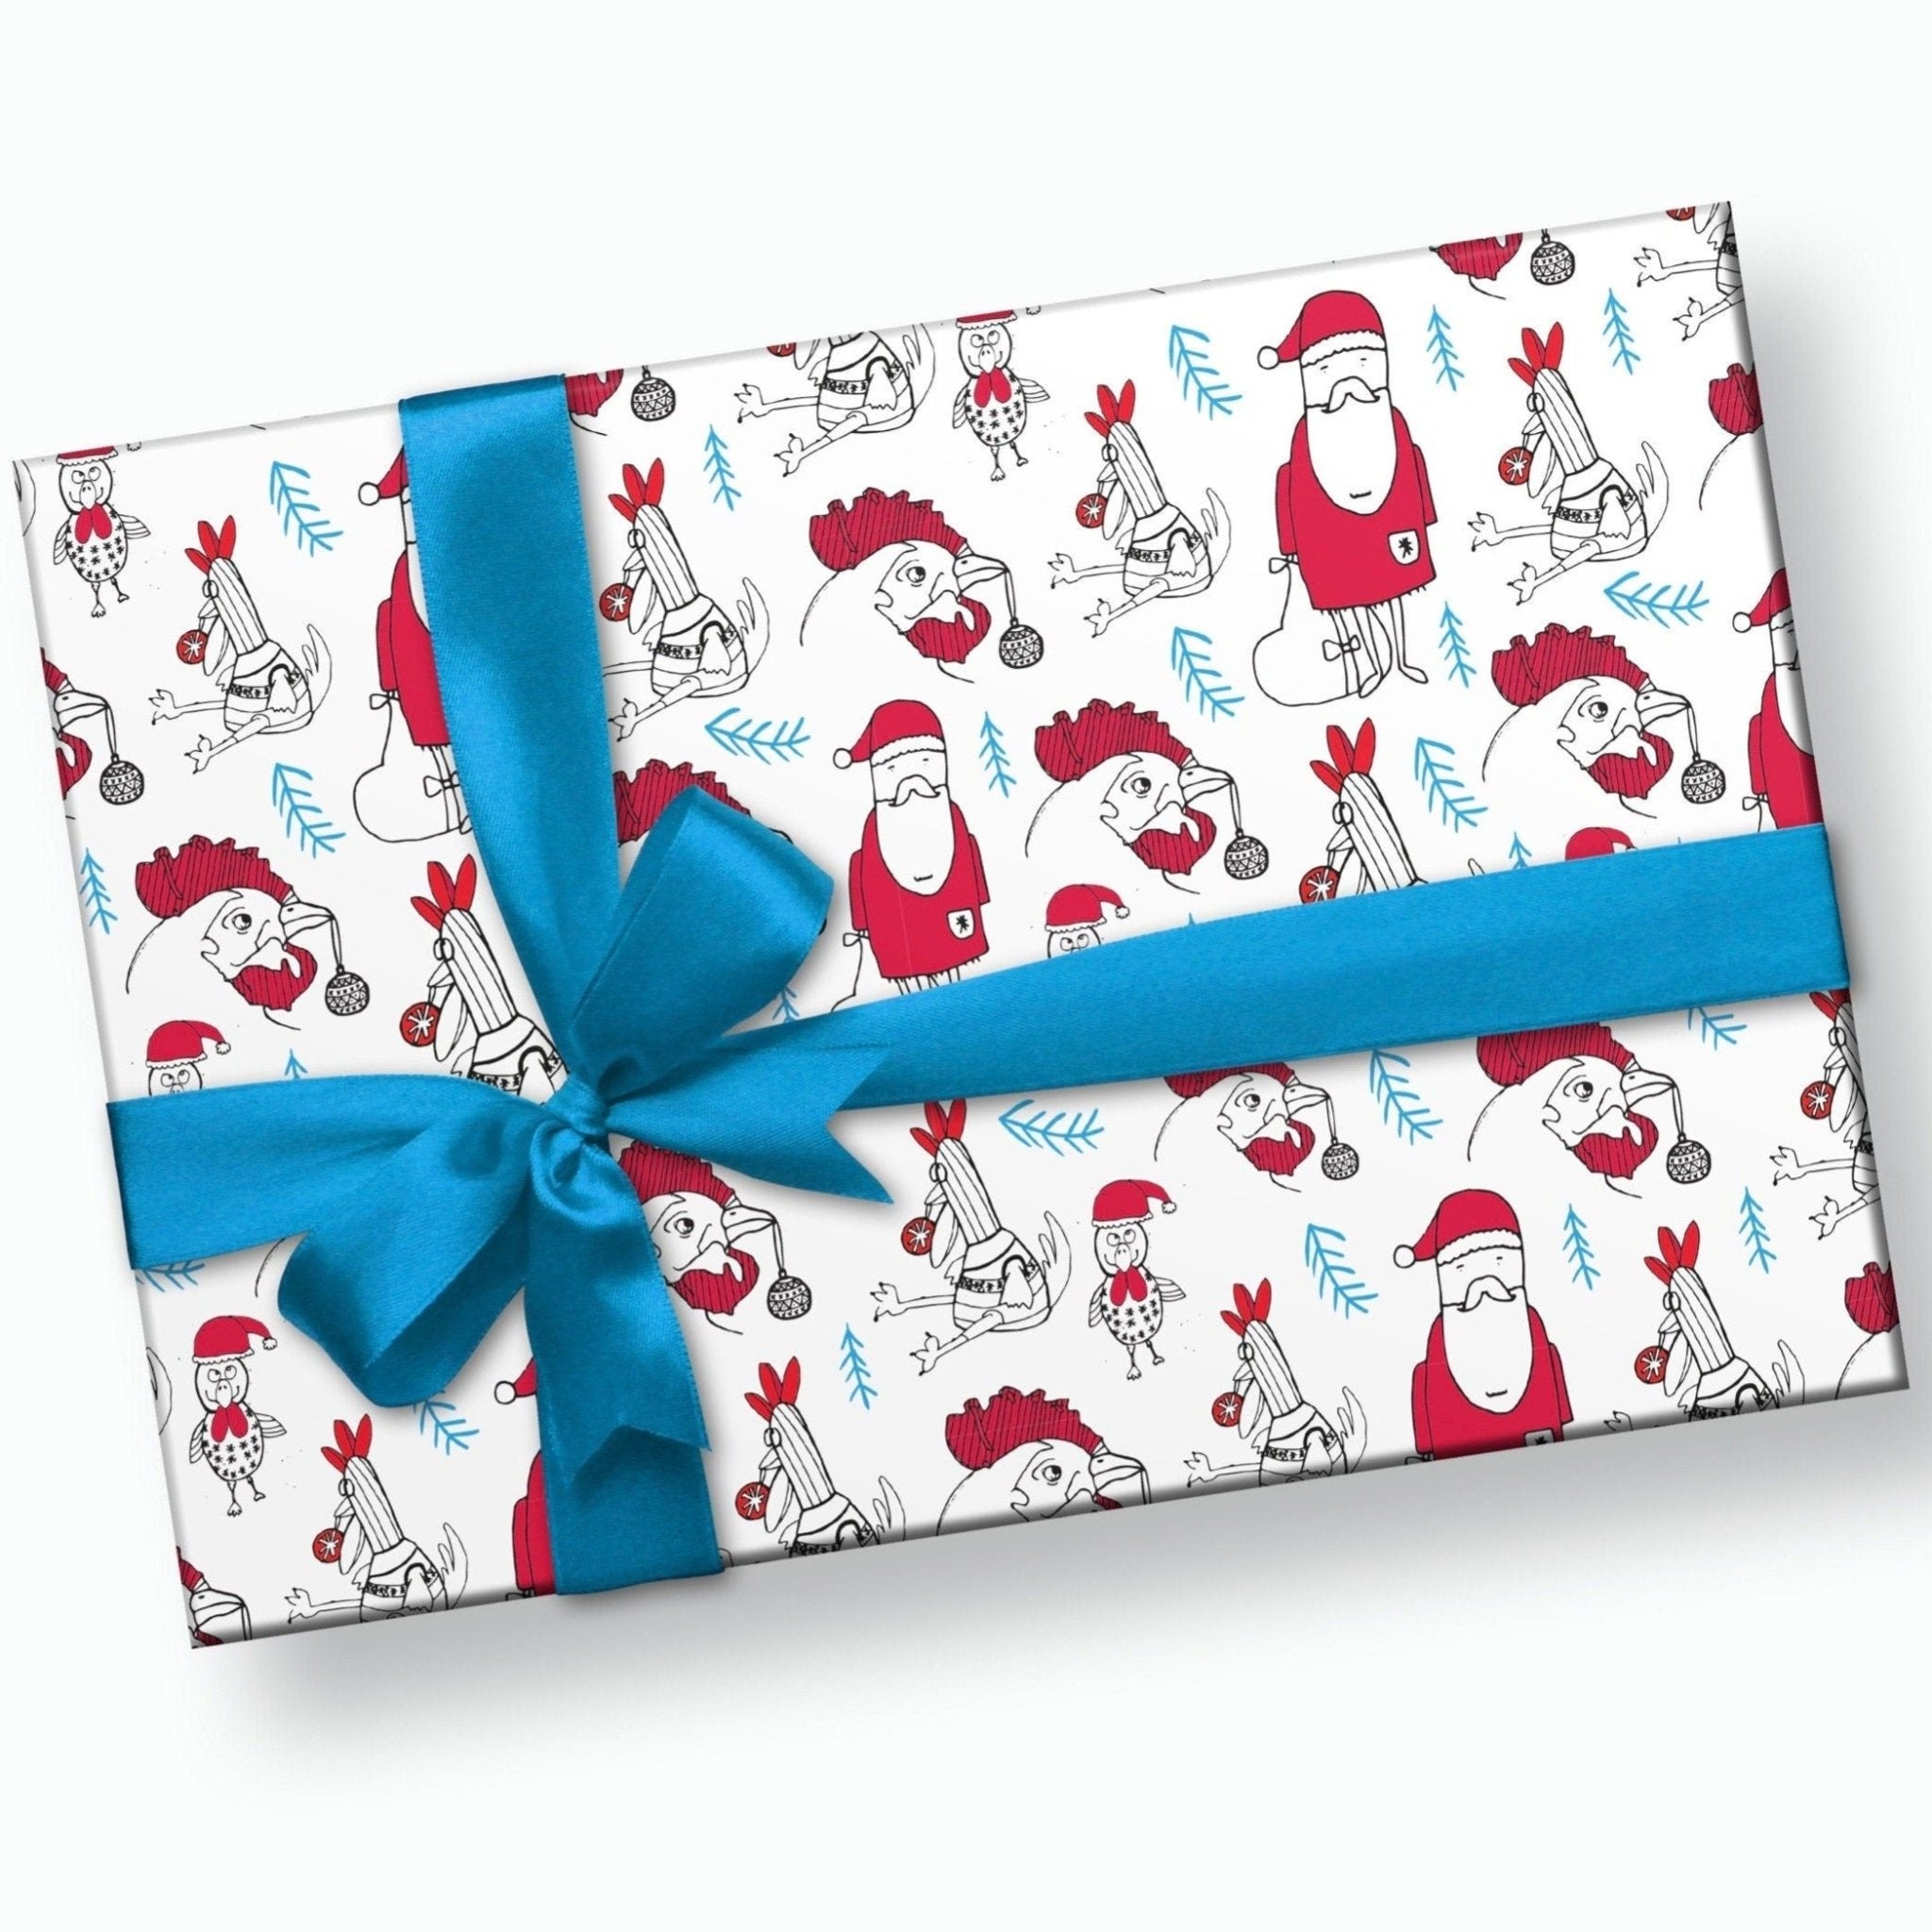 Santa Wrapping Paper - Stesha Party - christmas, holiday gw, ugly sweater